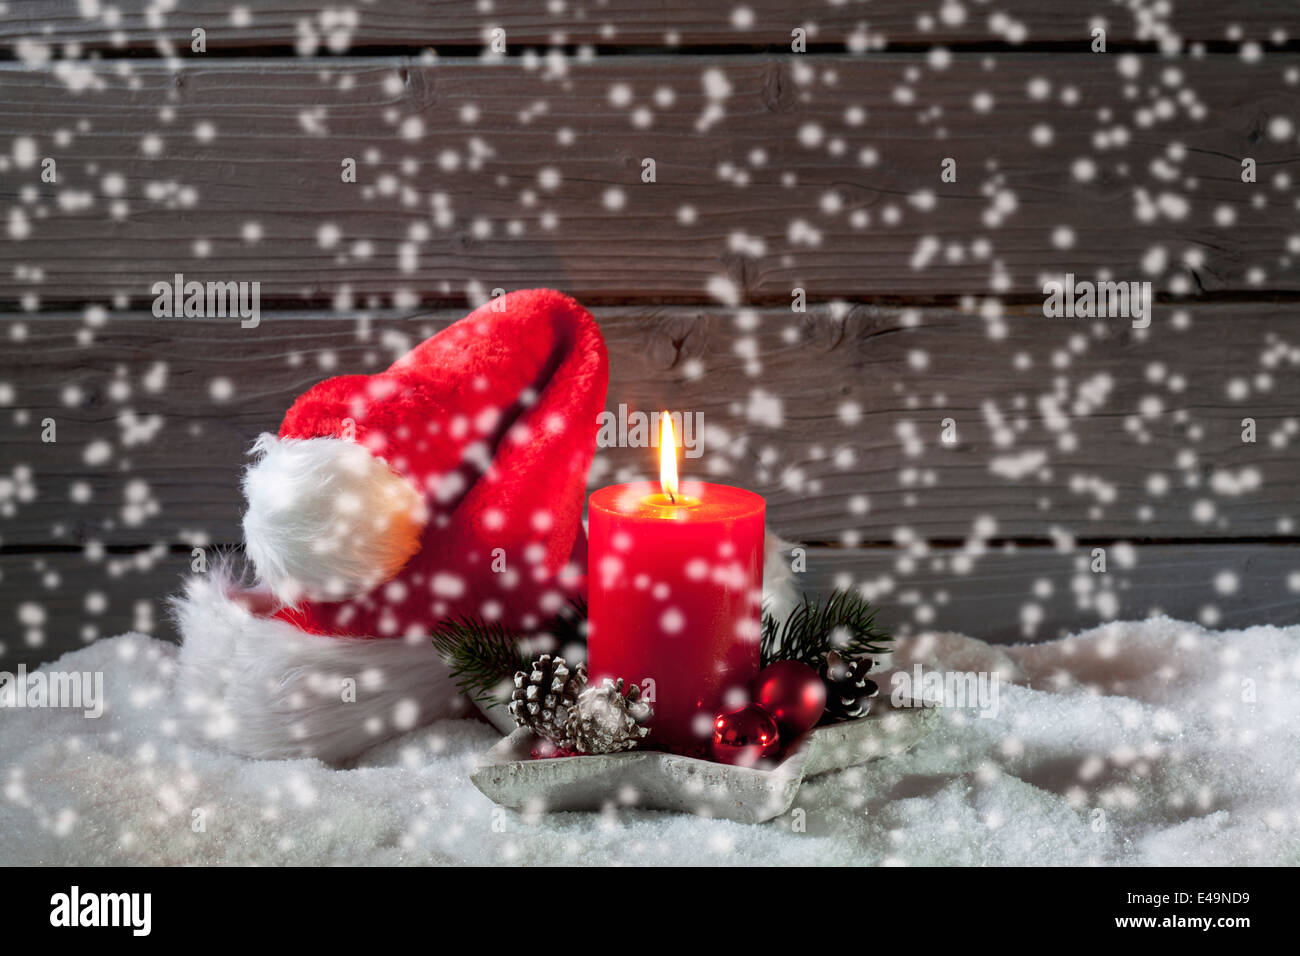 Lighted red candle and Christmas cap with rippling artificial snow in front Stock Photo